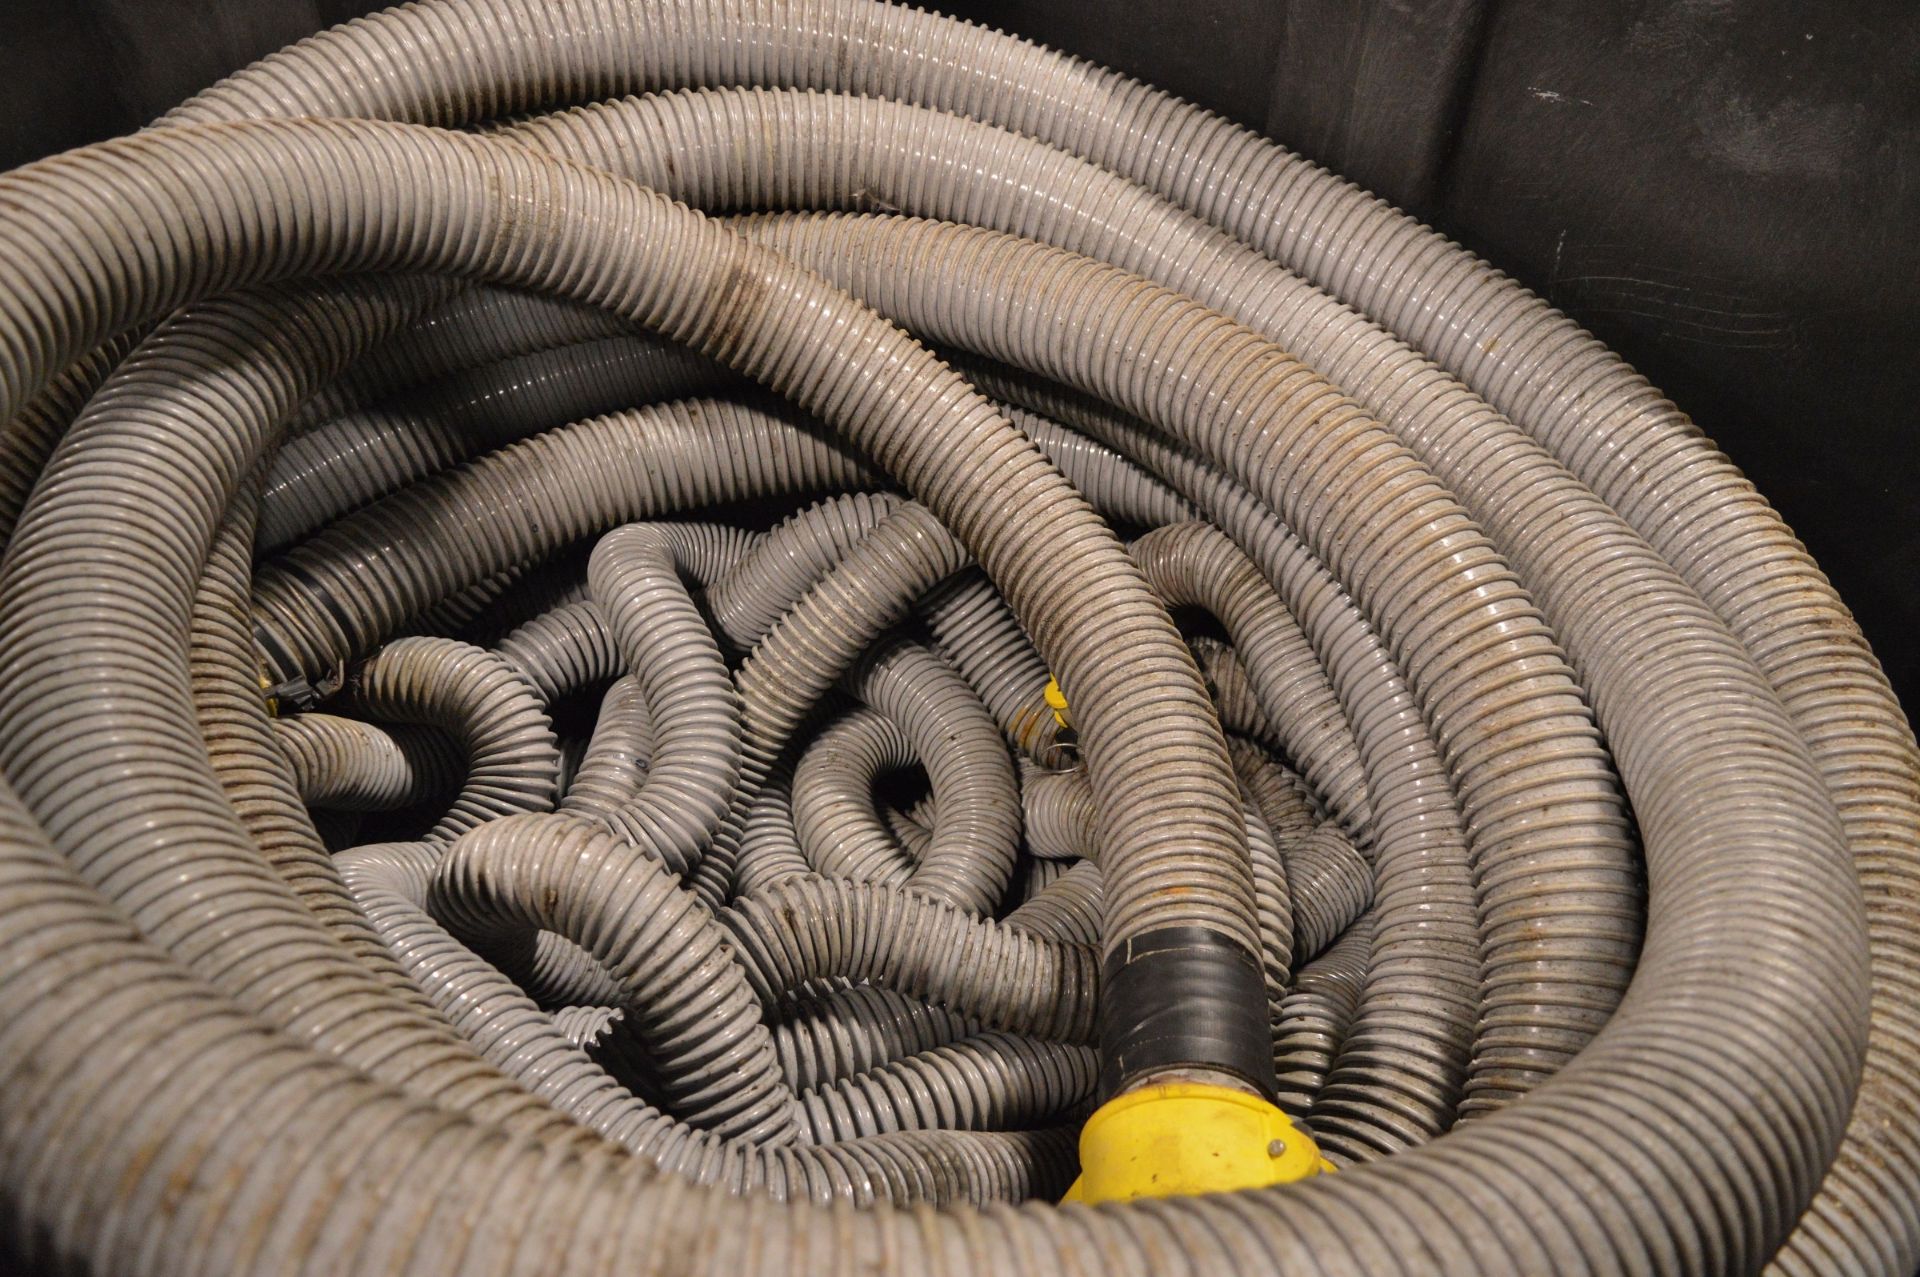 3" Flexible Hose - unknown length - Image 2 of 3